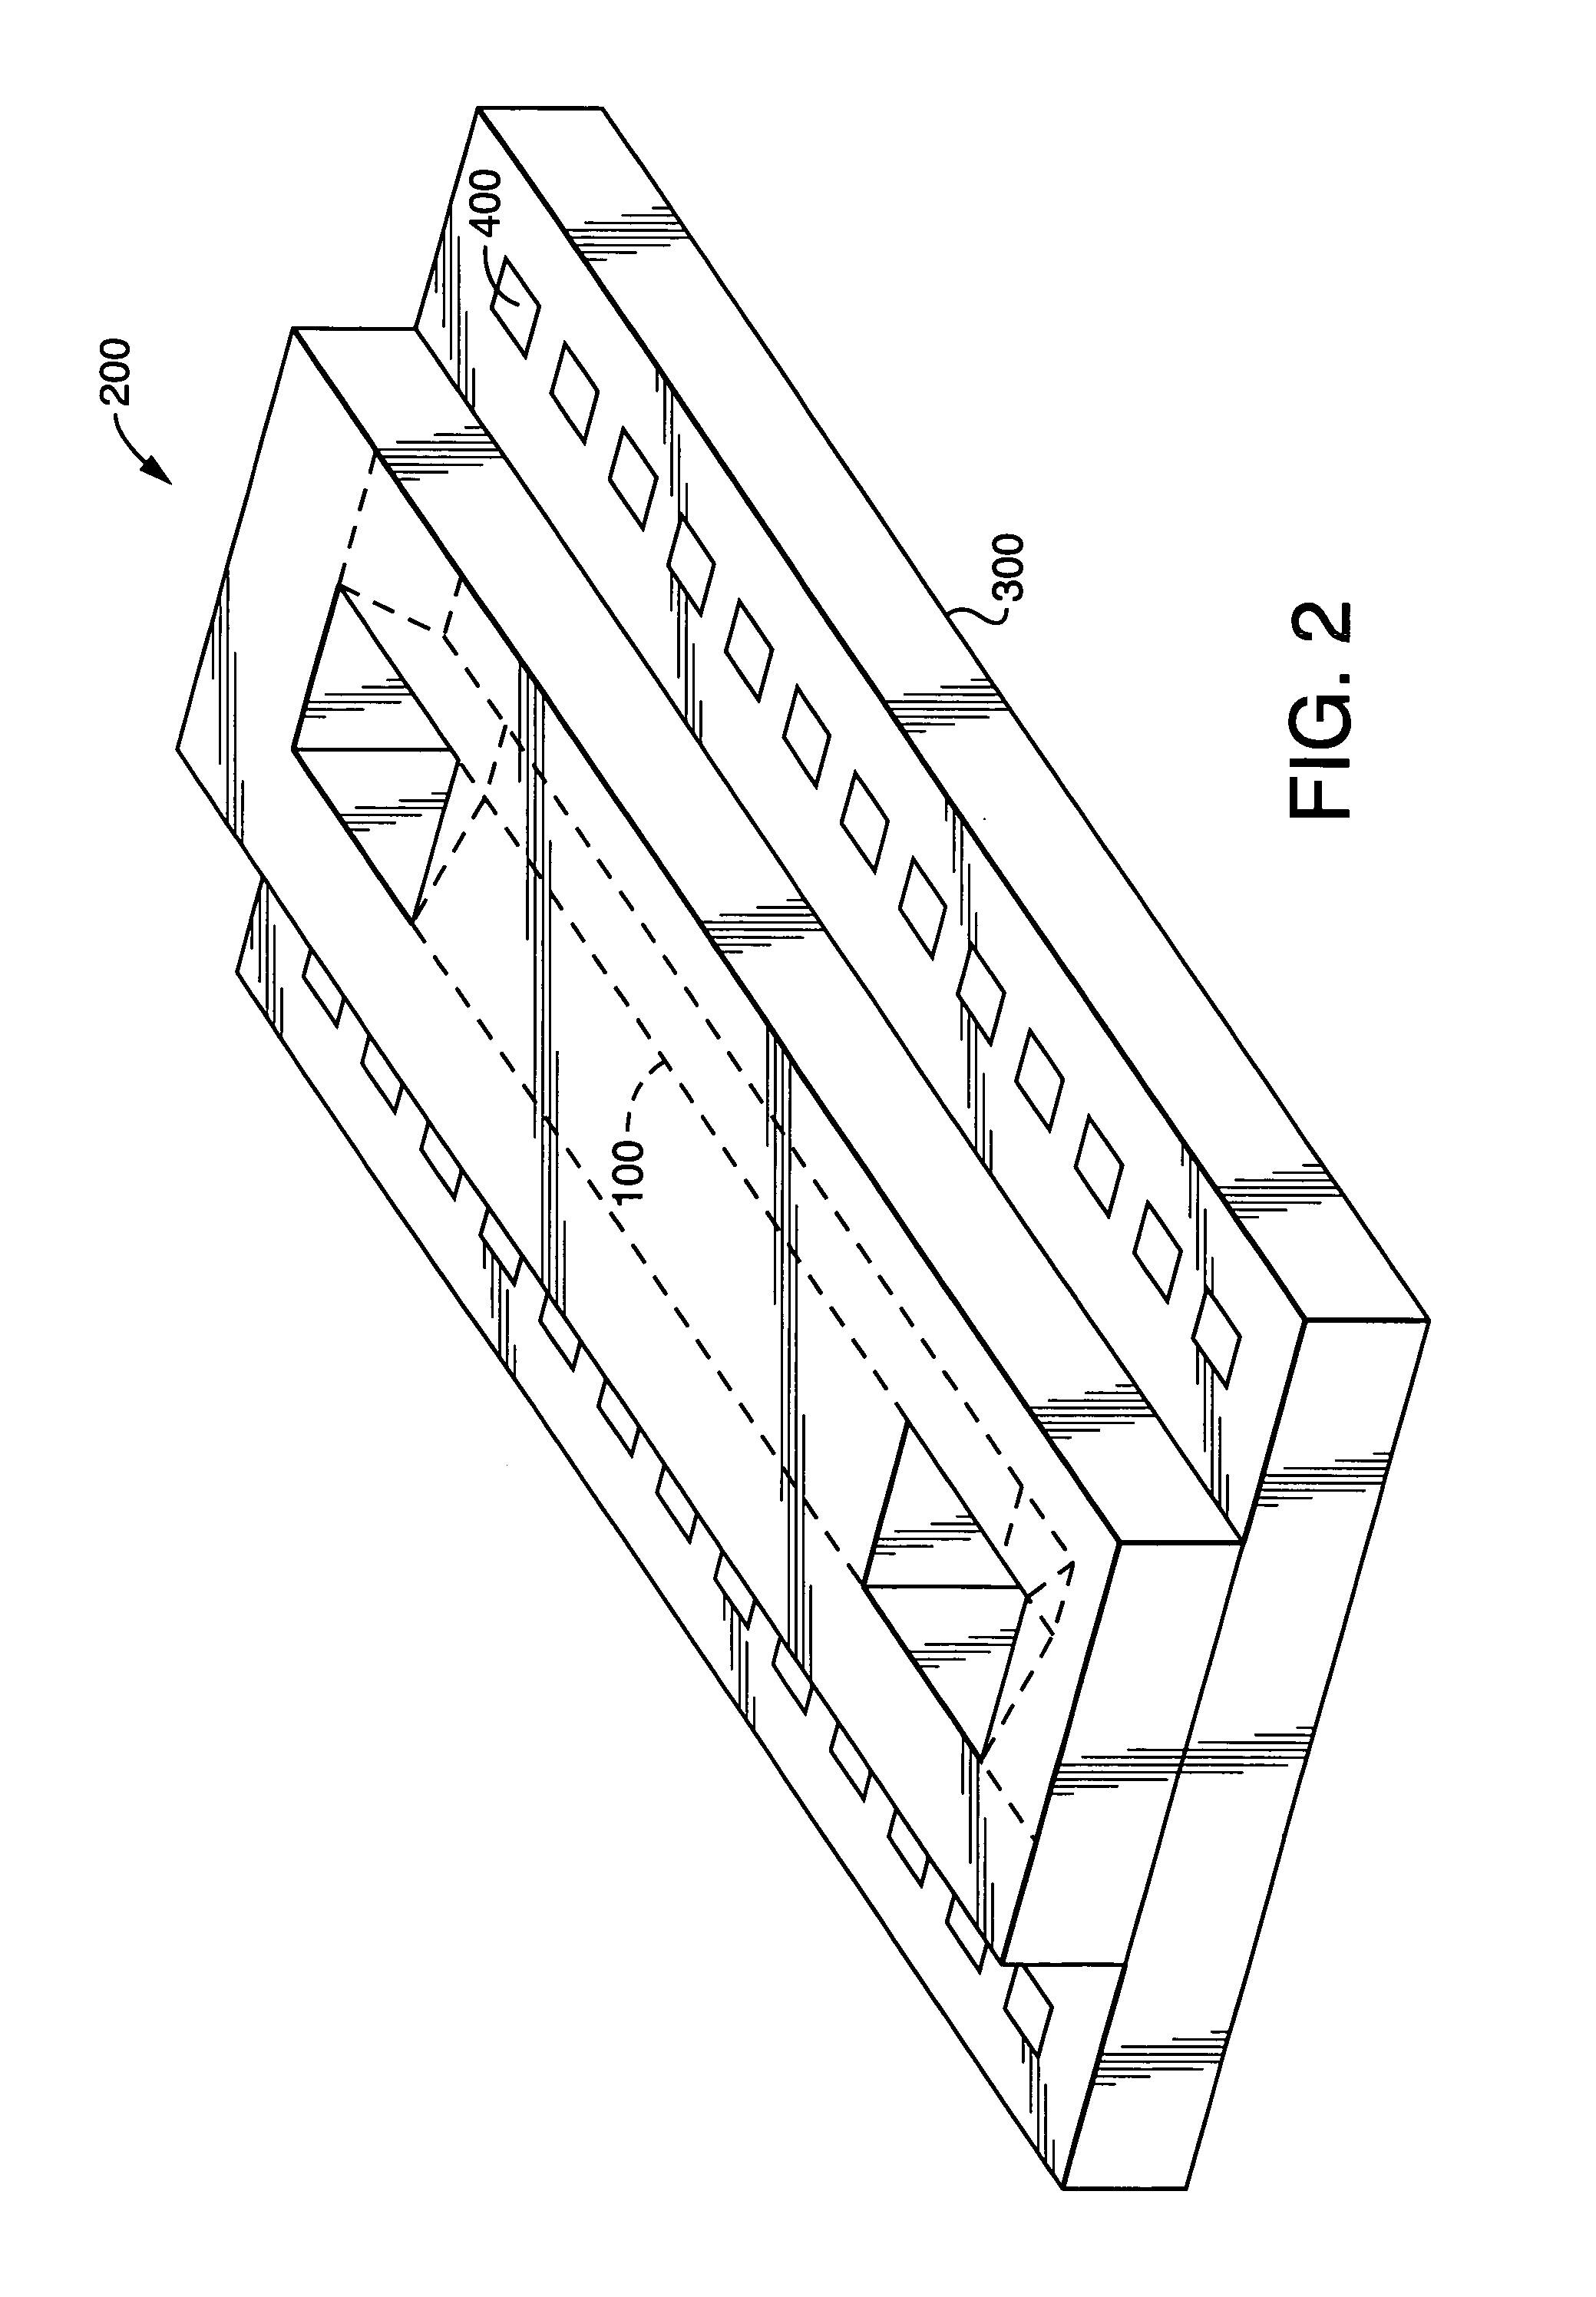 Thermal micro-valves for micro-integrated devices